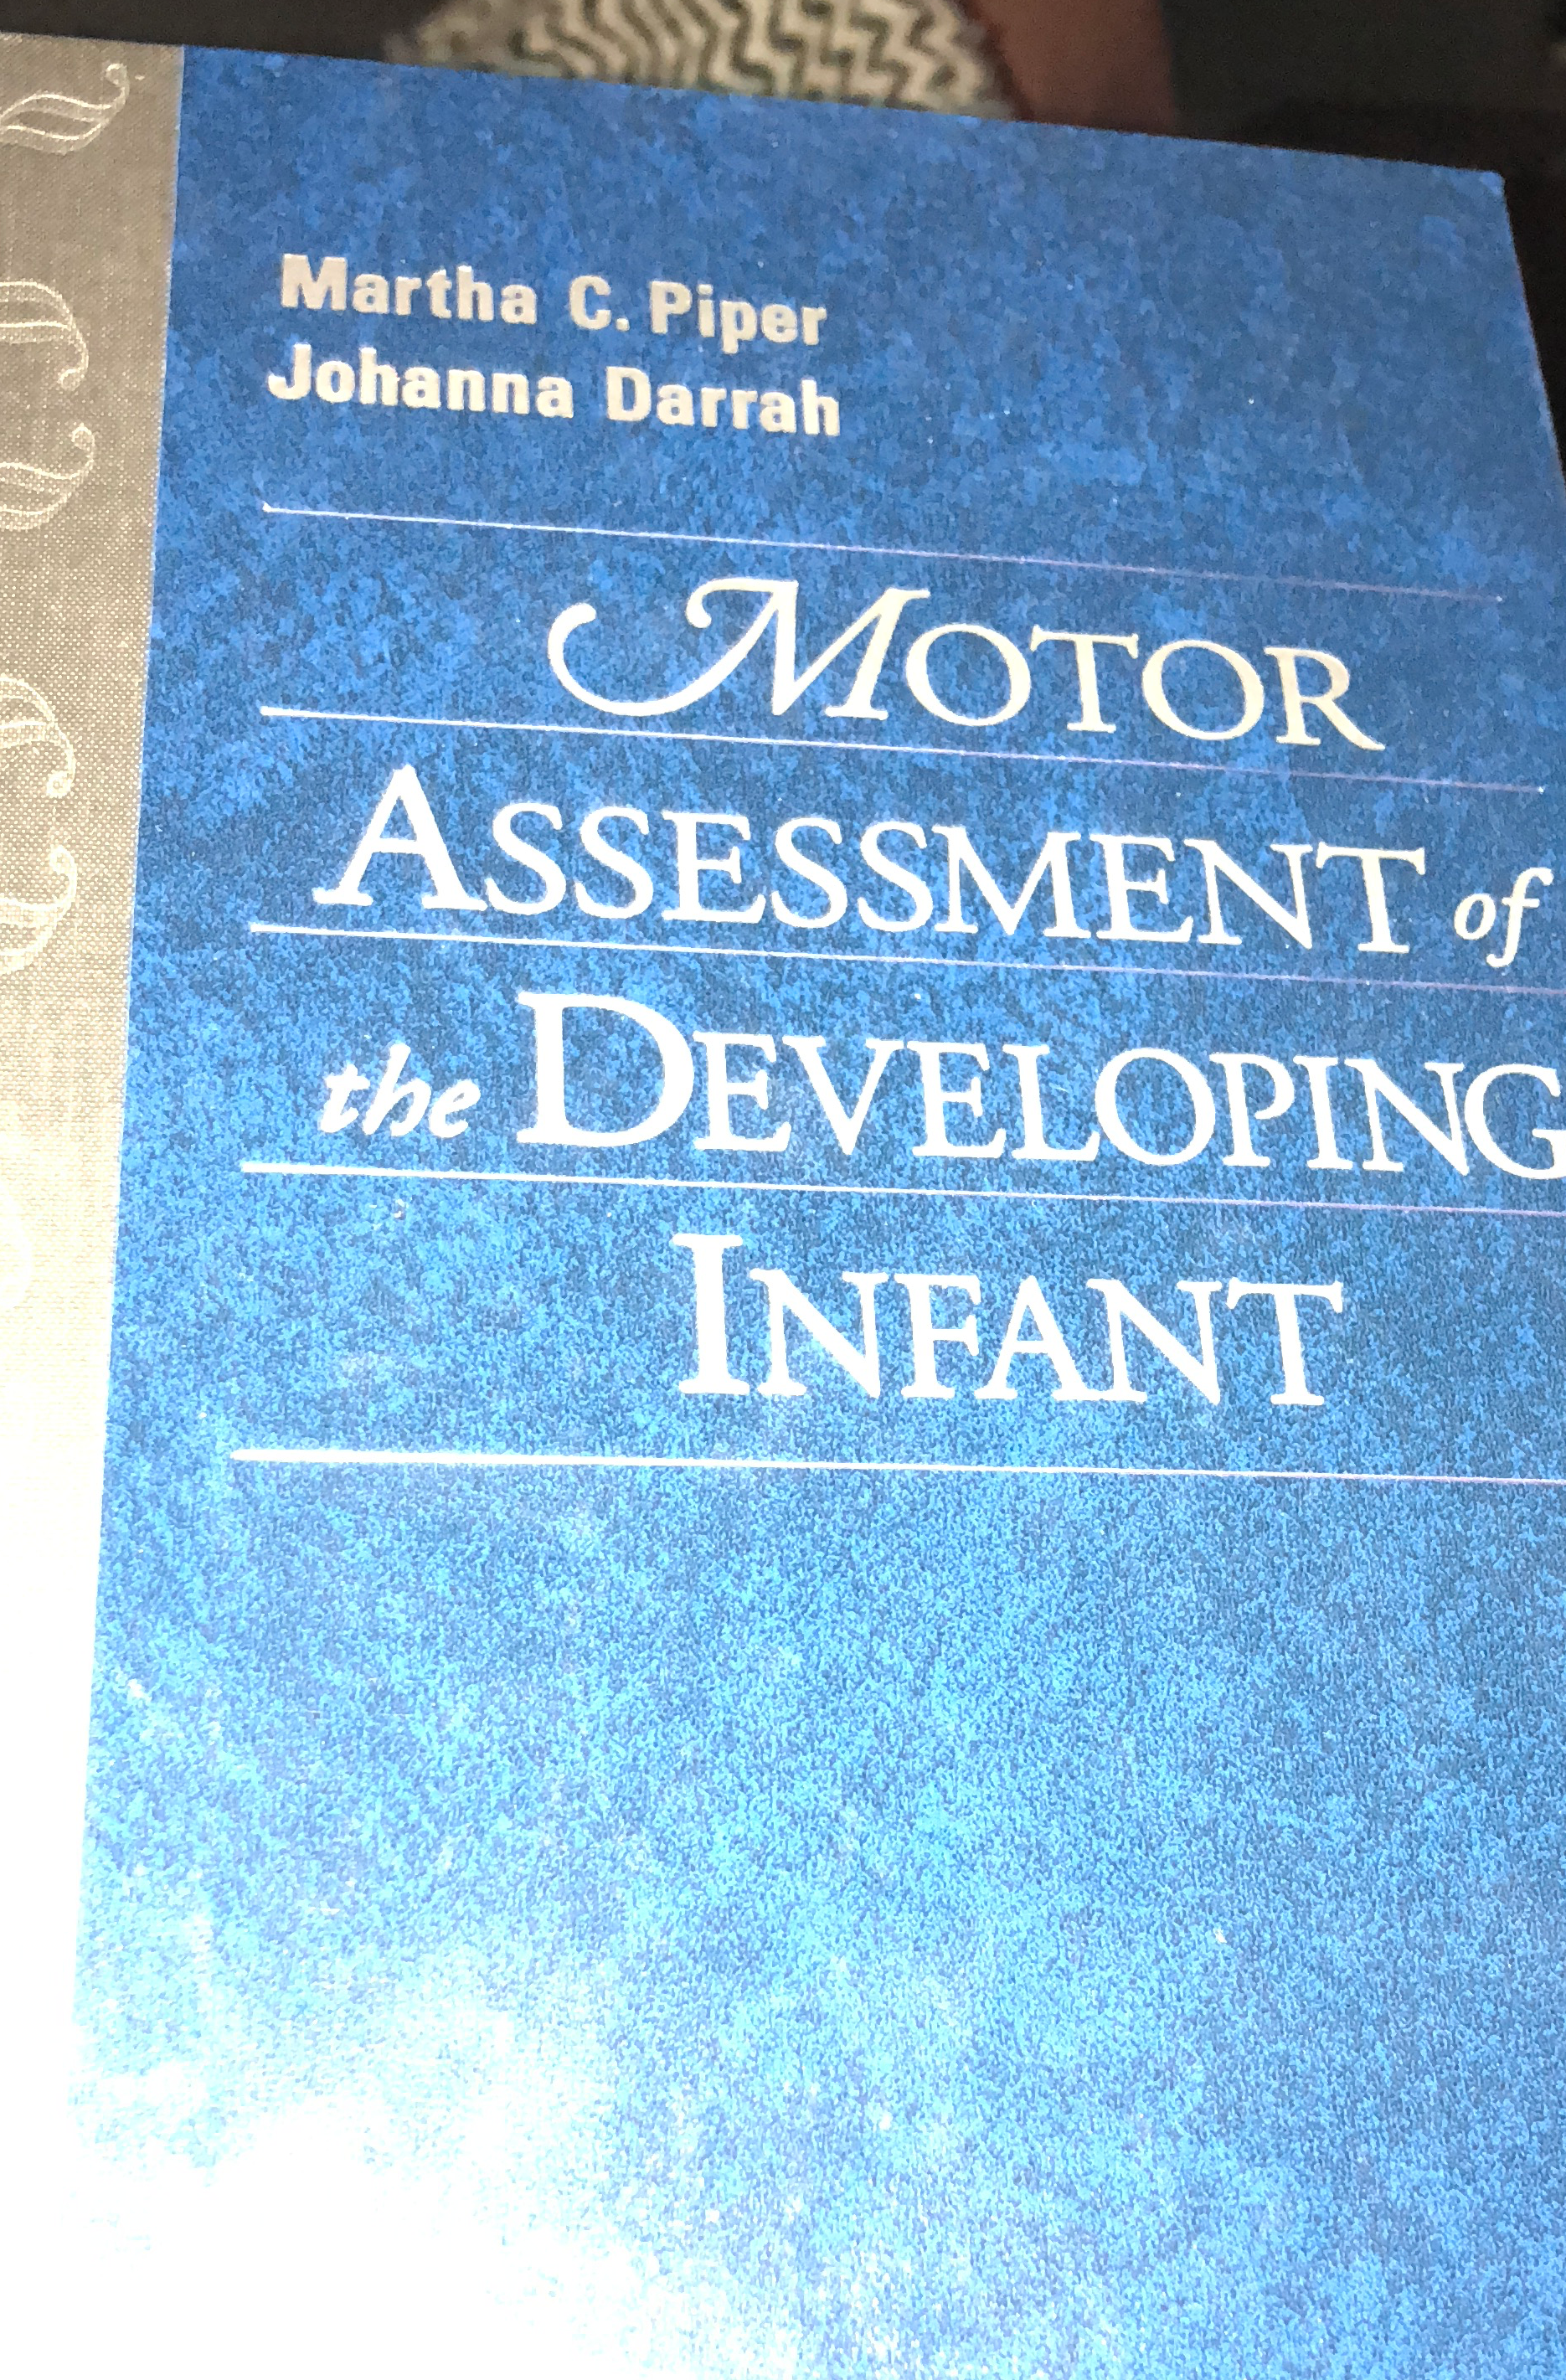 Motor assessement of thw developing infant